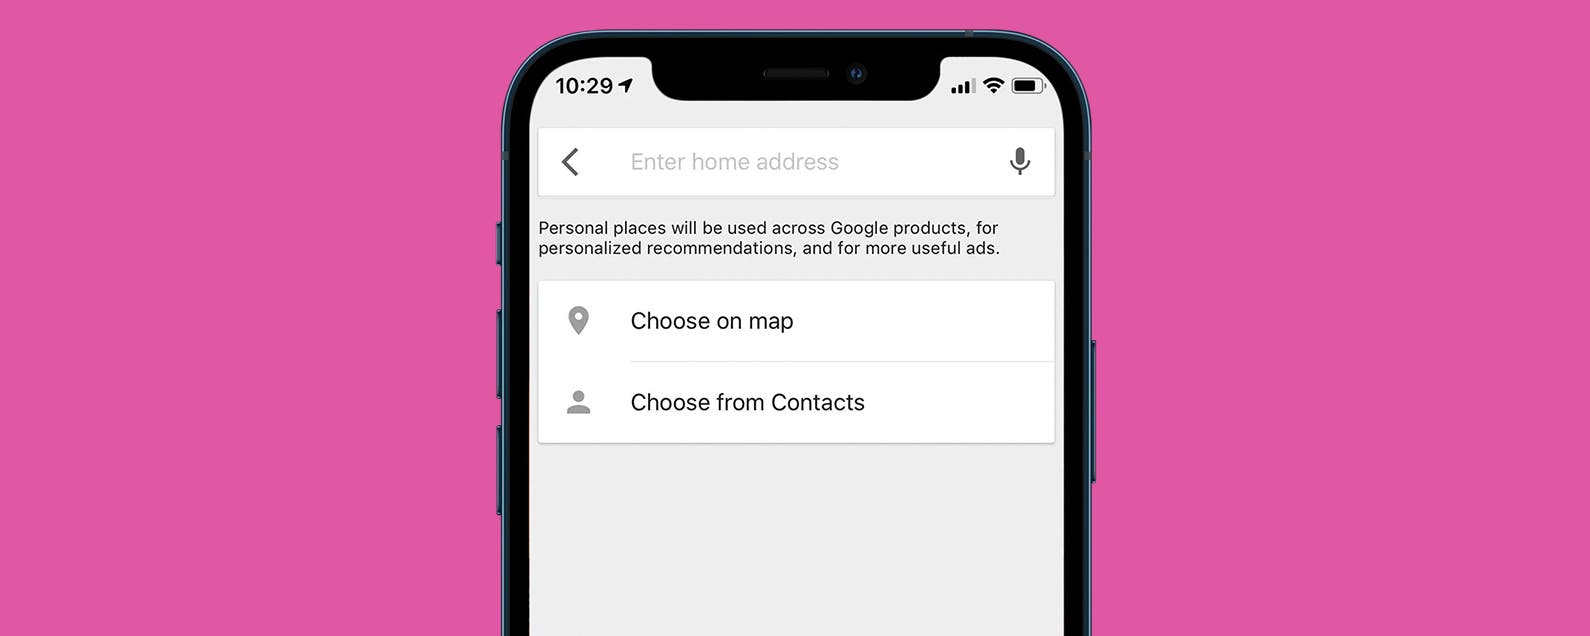 How to Change Work & Home Addresses in Maps on an iPhone